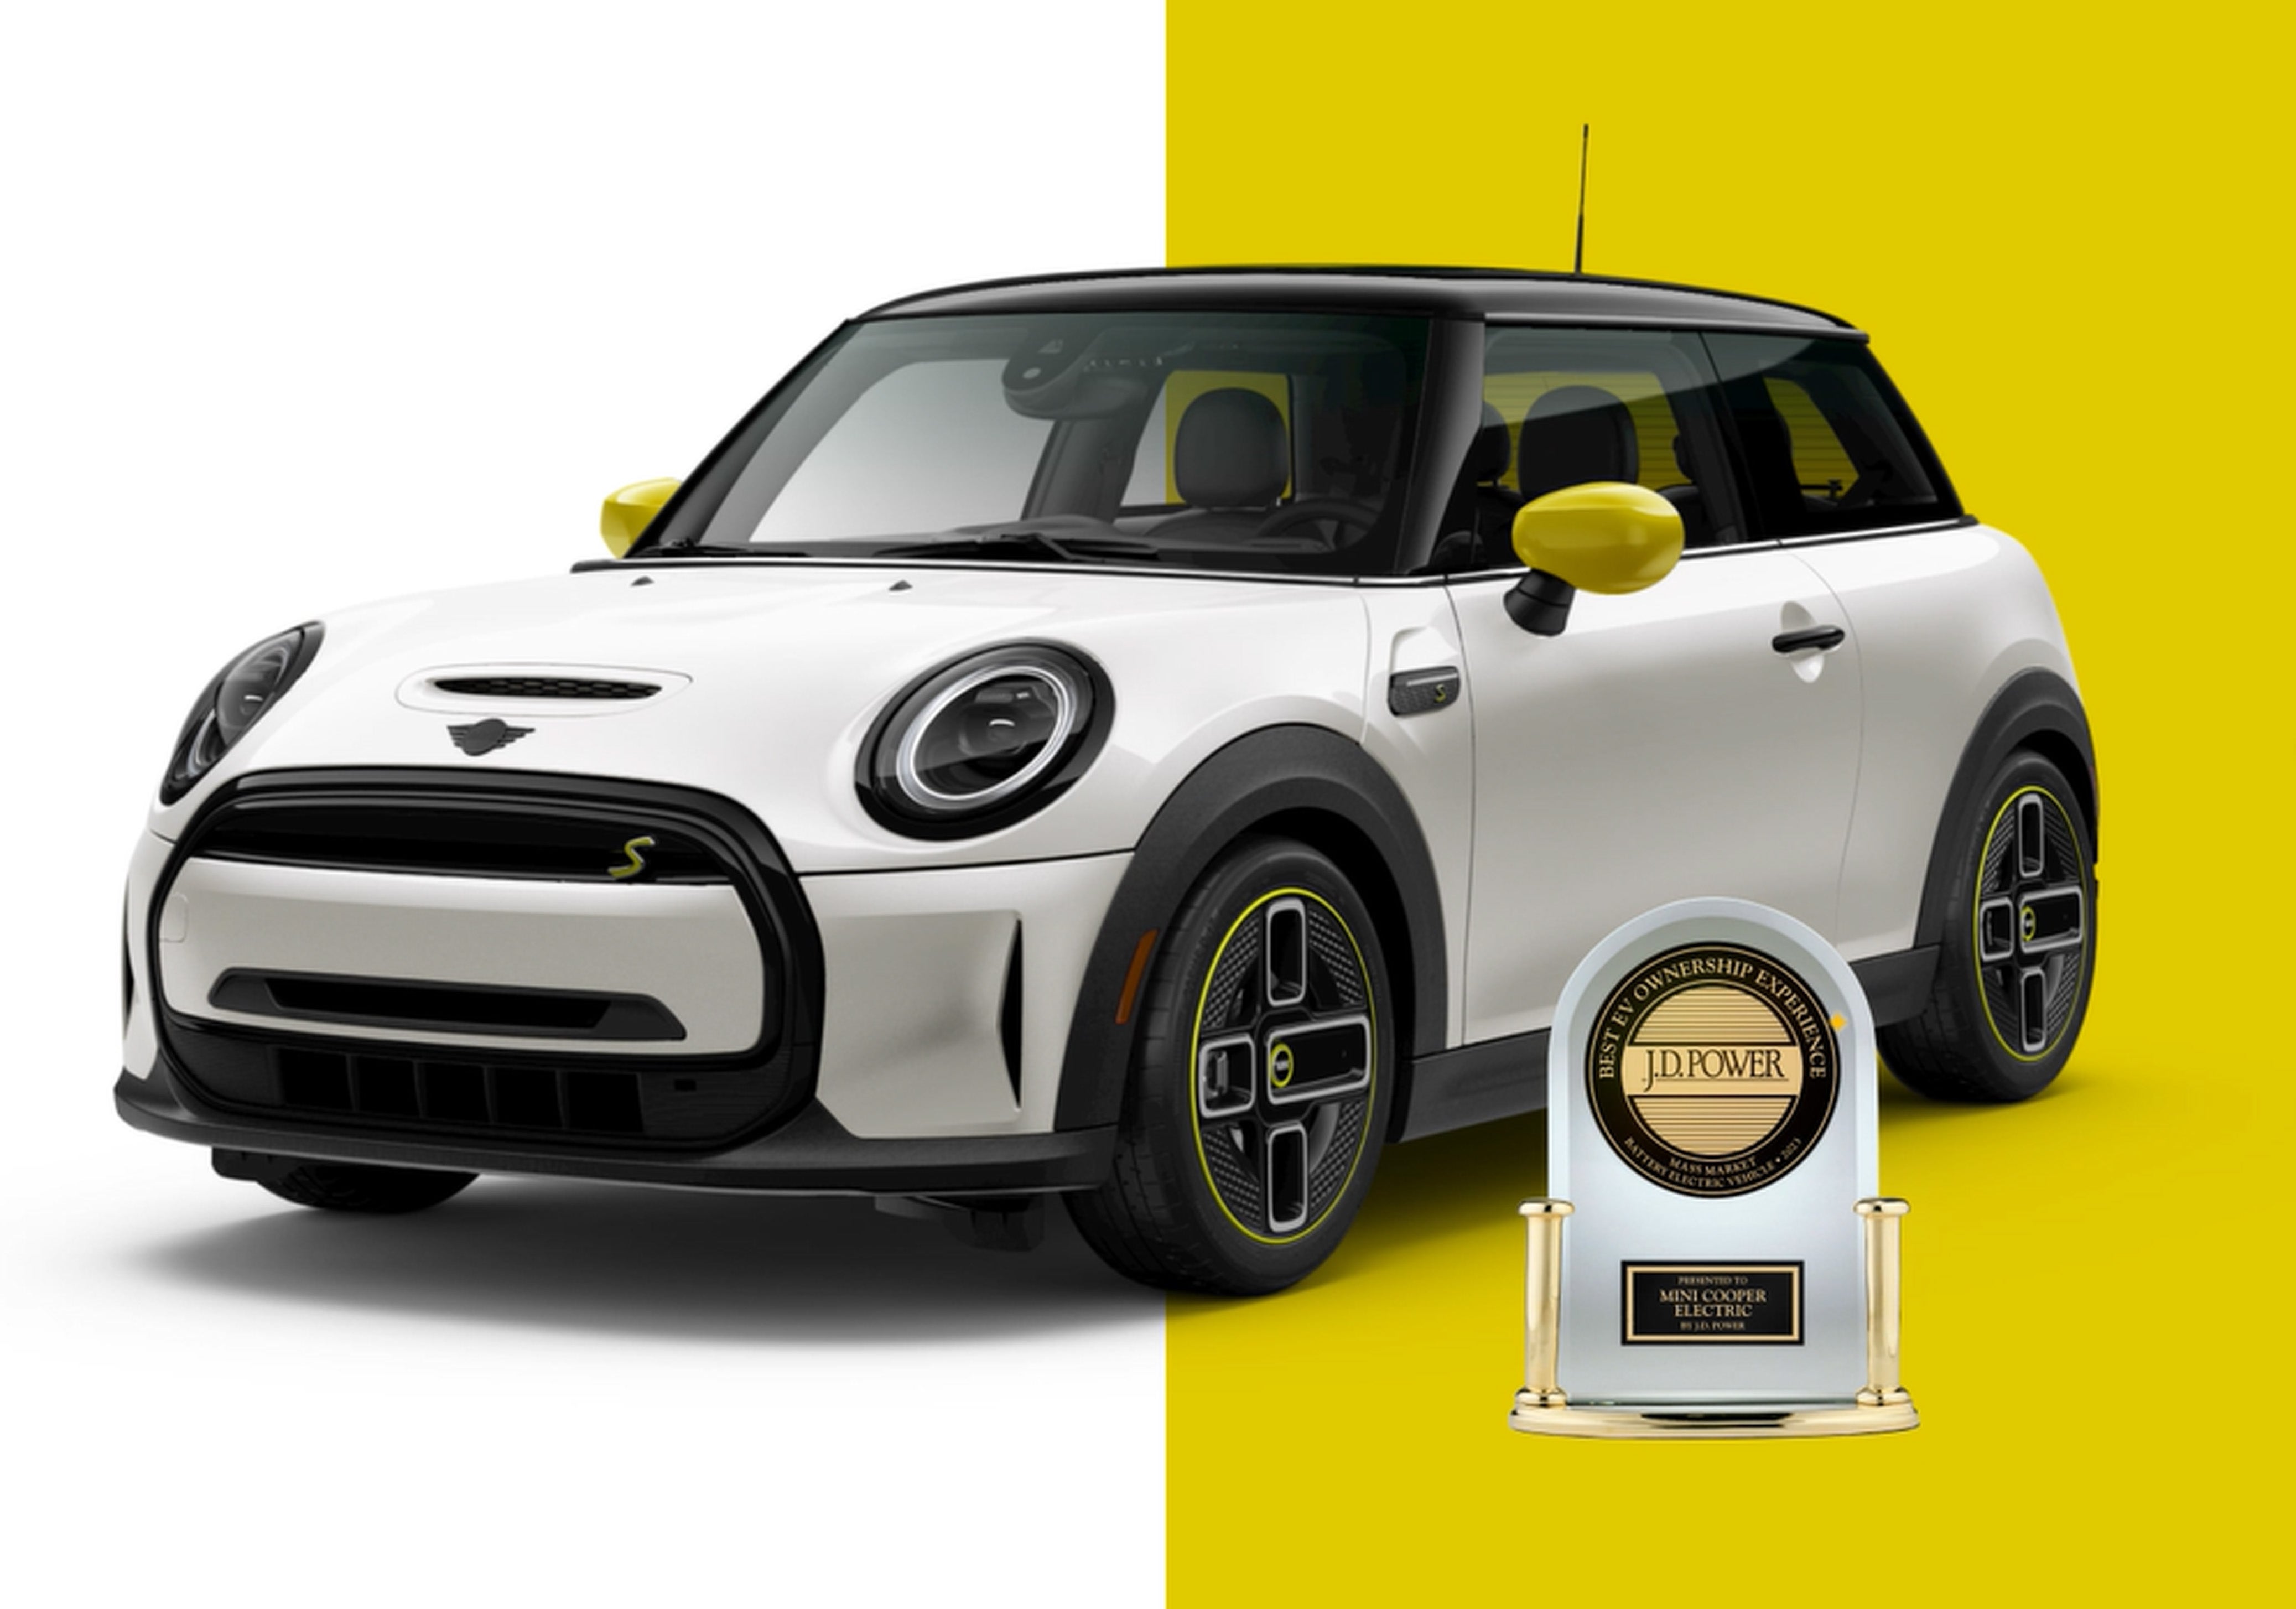 Frontside view of MINI Electric with white and gold background and J.D. Power Award below driver door. Closeup view of a J.D. Power Award trophy with “BEST EV OWNERSHIP EXPERIENCE” and “PRESENTED TO MINI COOPER ELECTRIC BY J.D. POWER